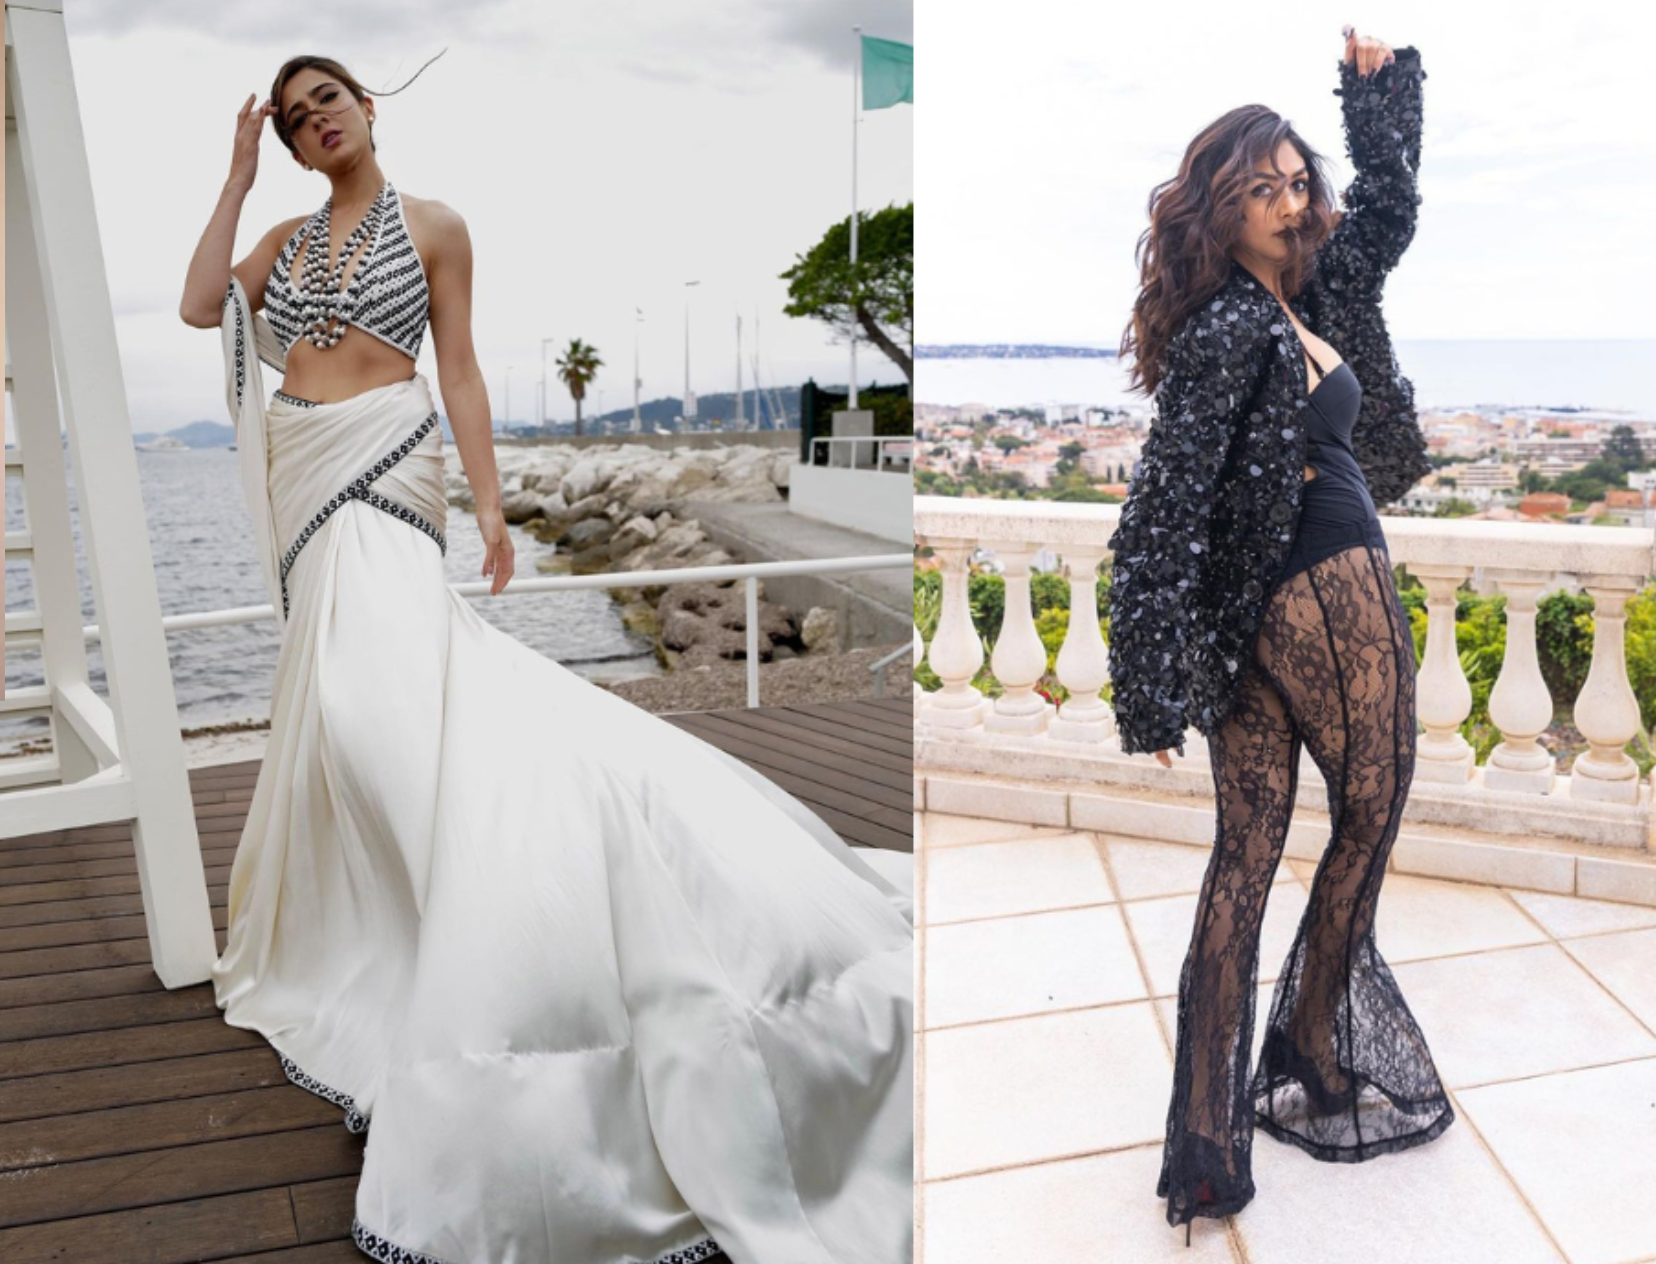 Desi Divas Followed A Special Theme On Cannes Day 2, Can You Guess What It Was?